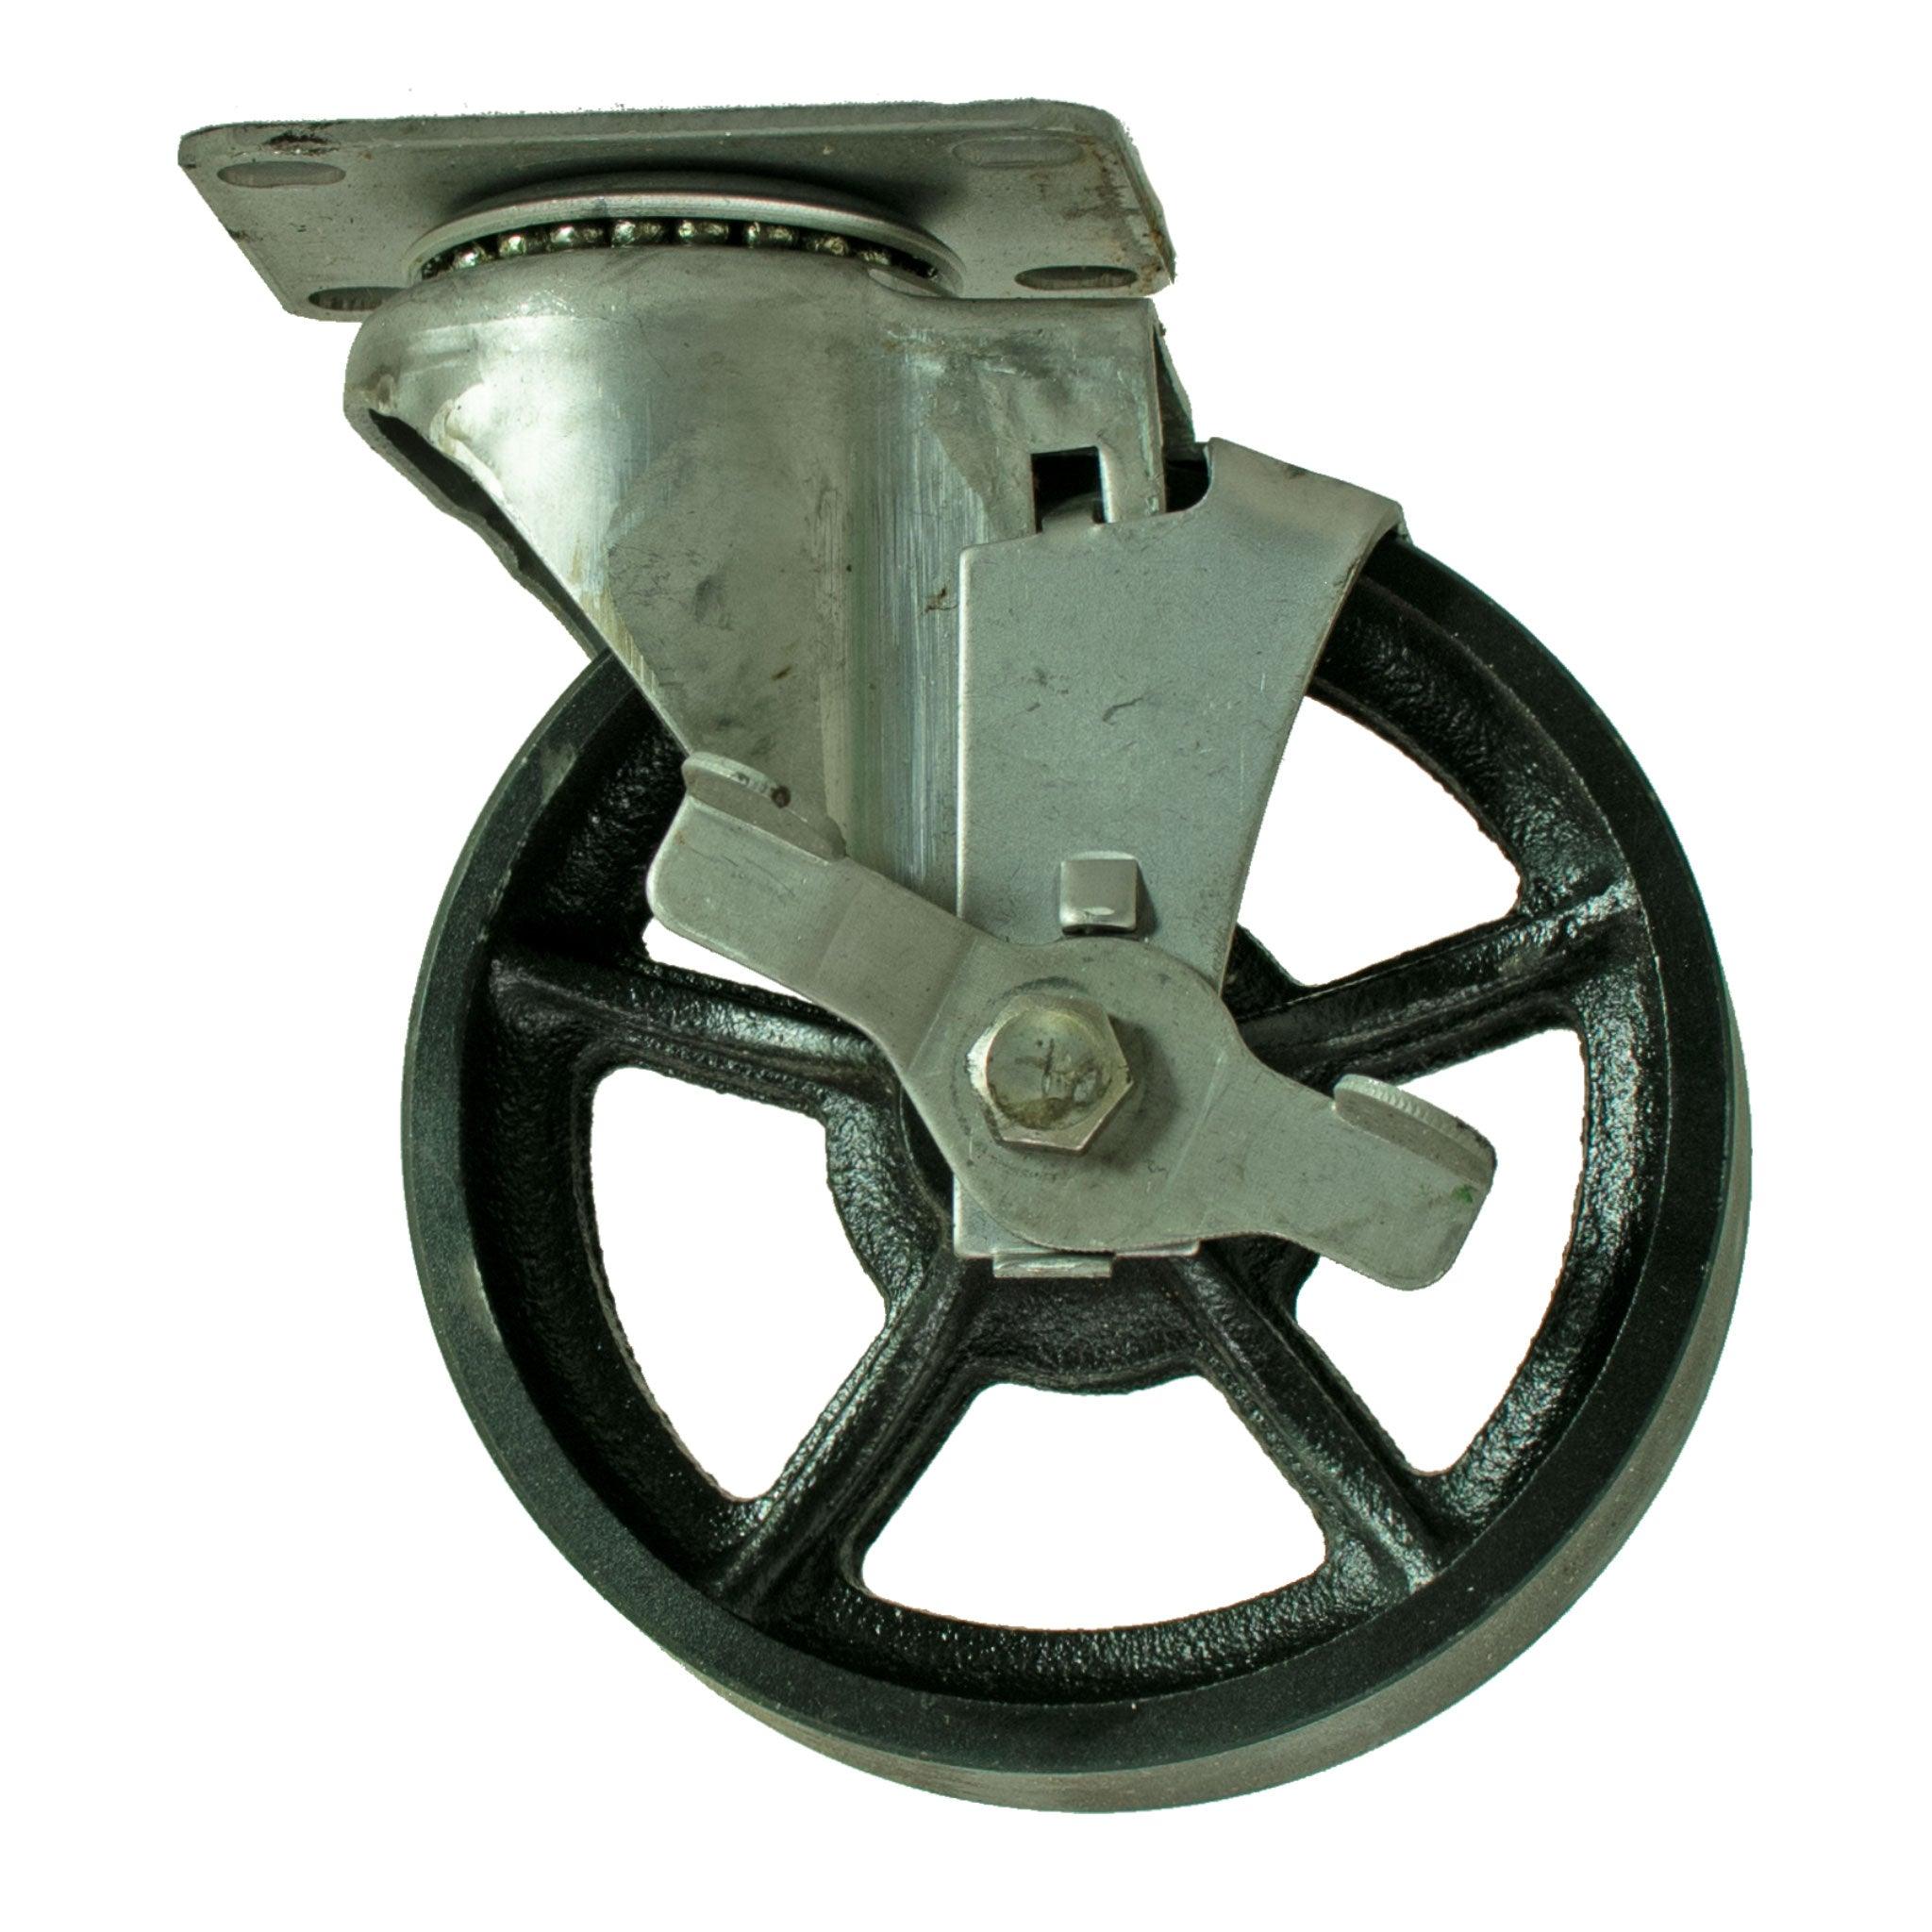 6in Vintage Casters - Swivel with Brakes